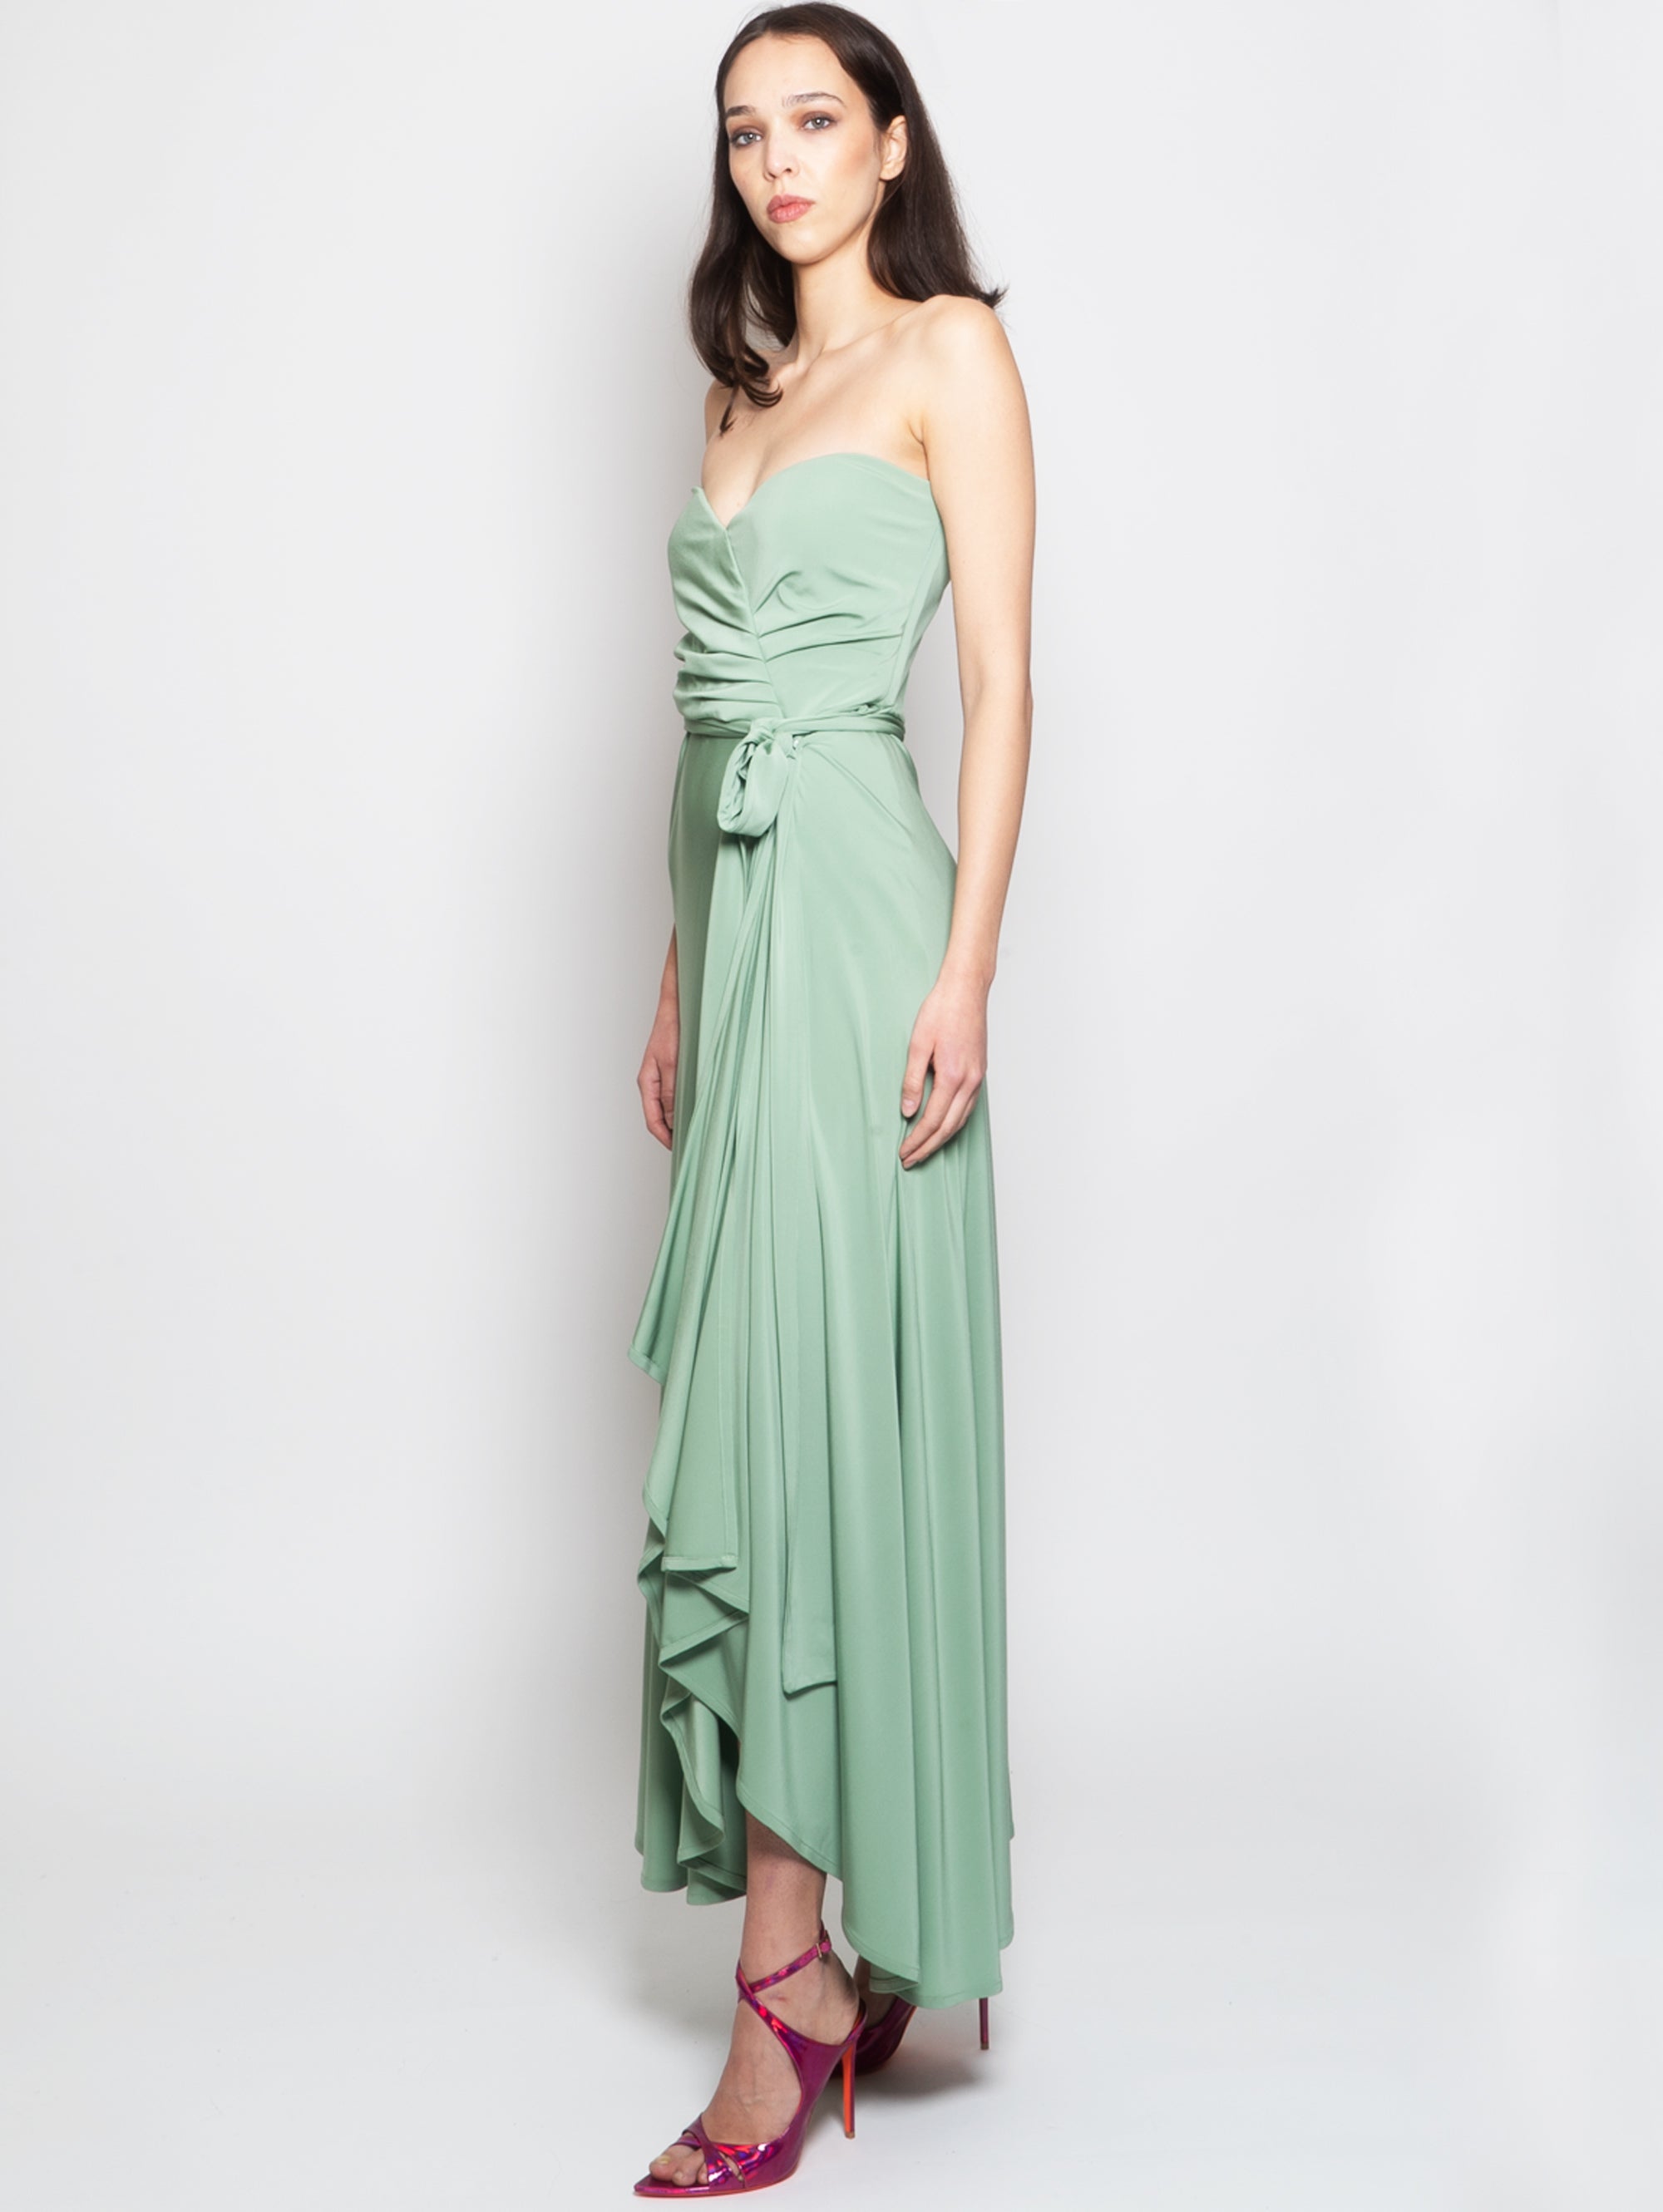 Long Dress with Teal Sweetheart Neckline